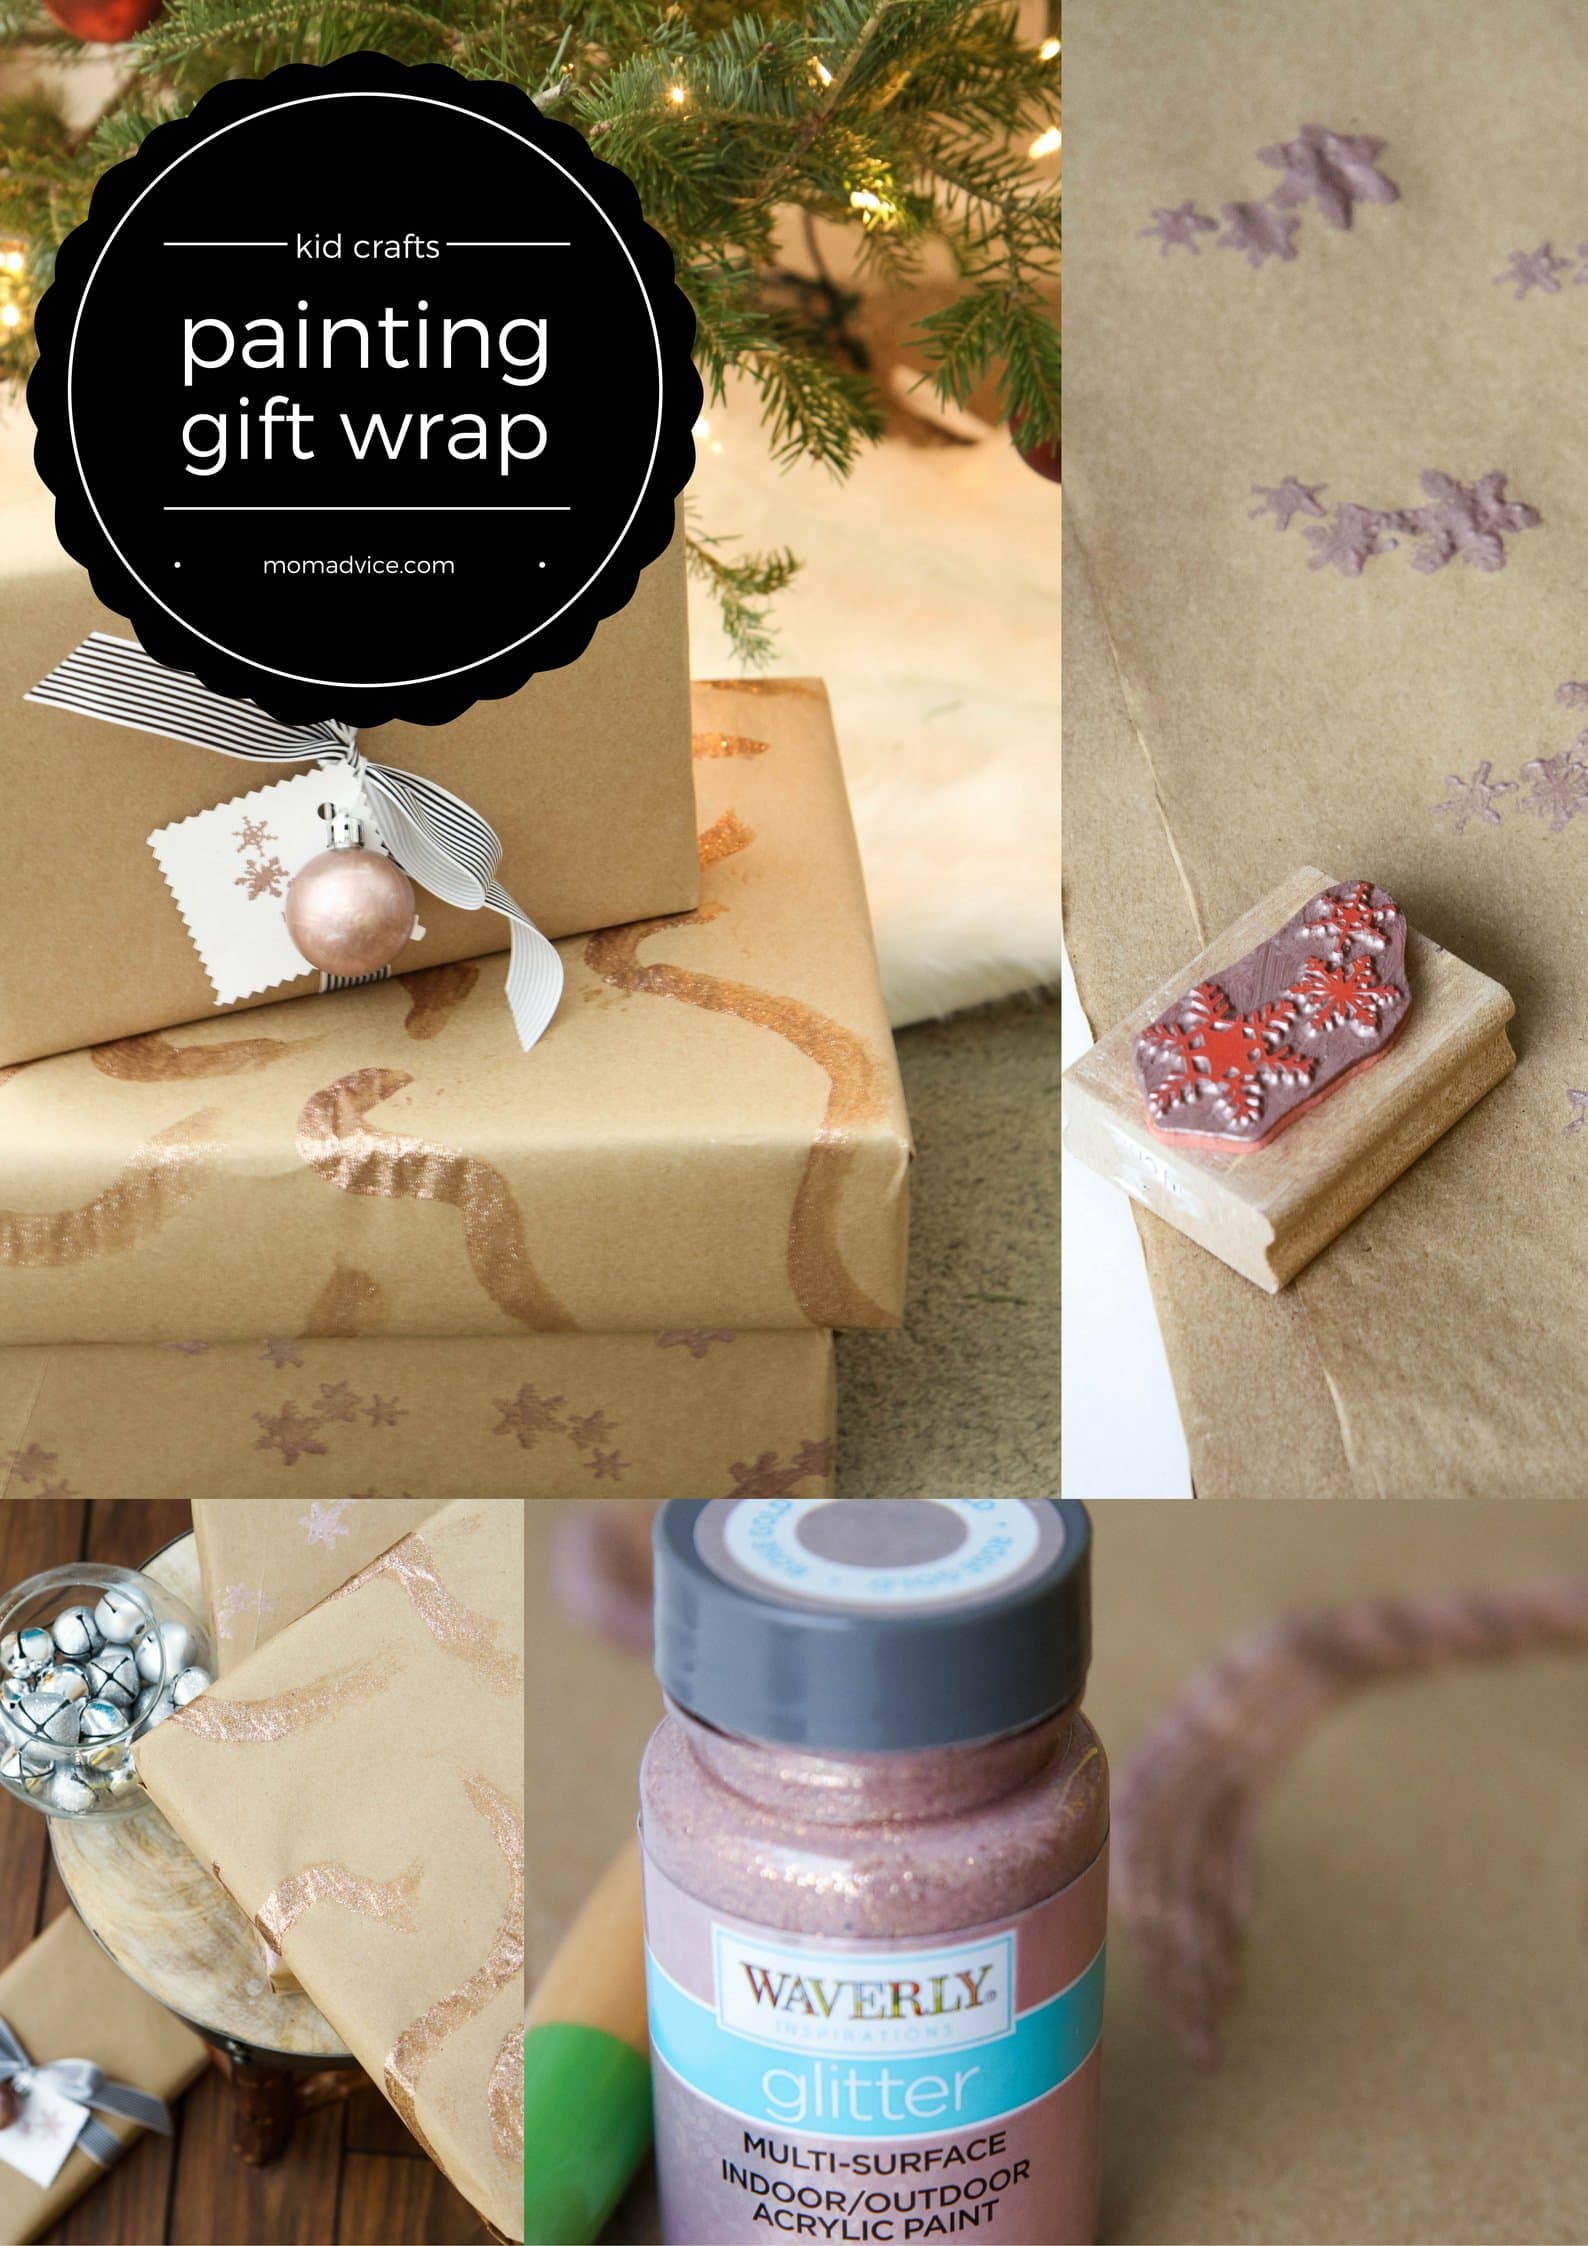 How to Wrap a Present Without Tape: 7 Genius Ideas | First For Women